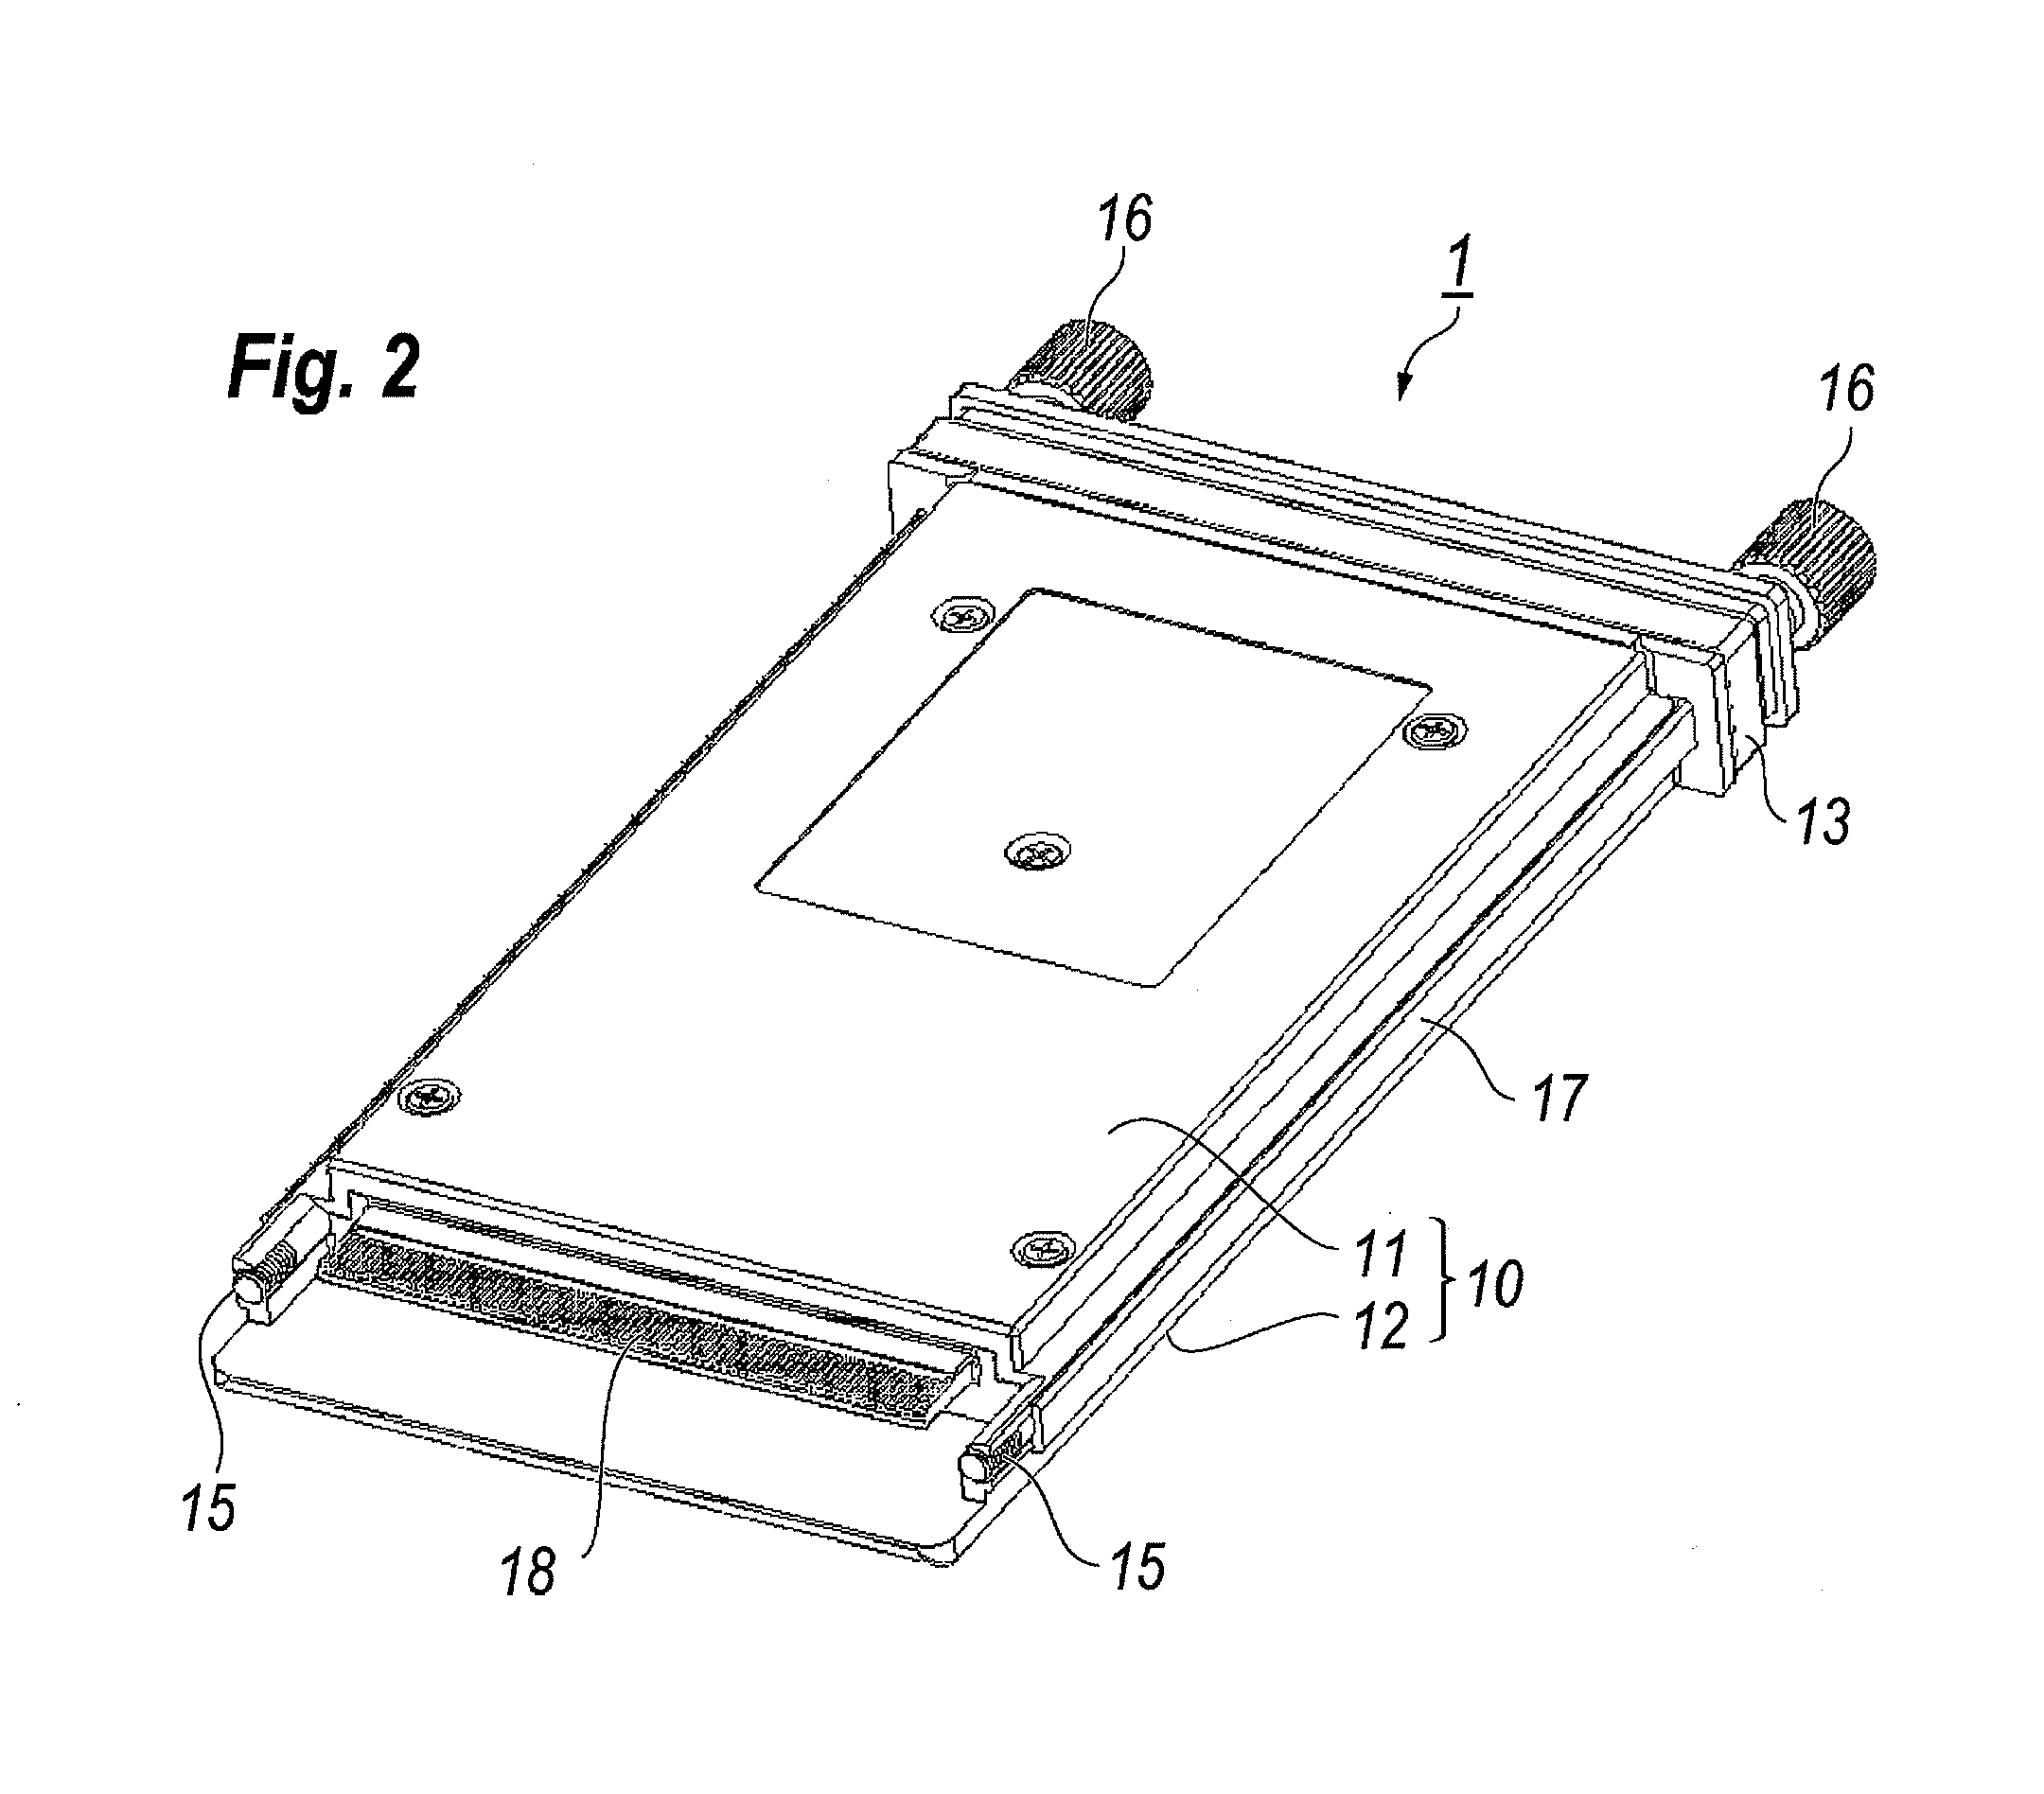 Optical transceiver with inner fiber set within tray securing thermal path from electronic device to housing